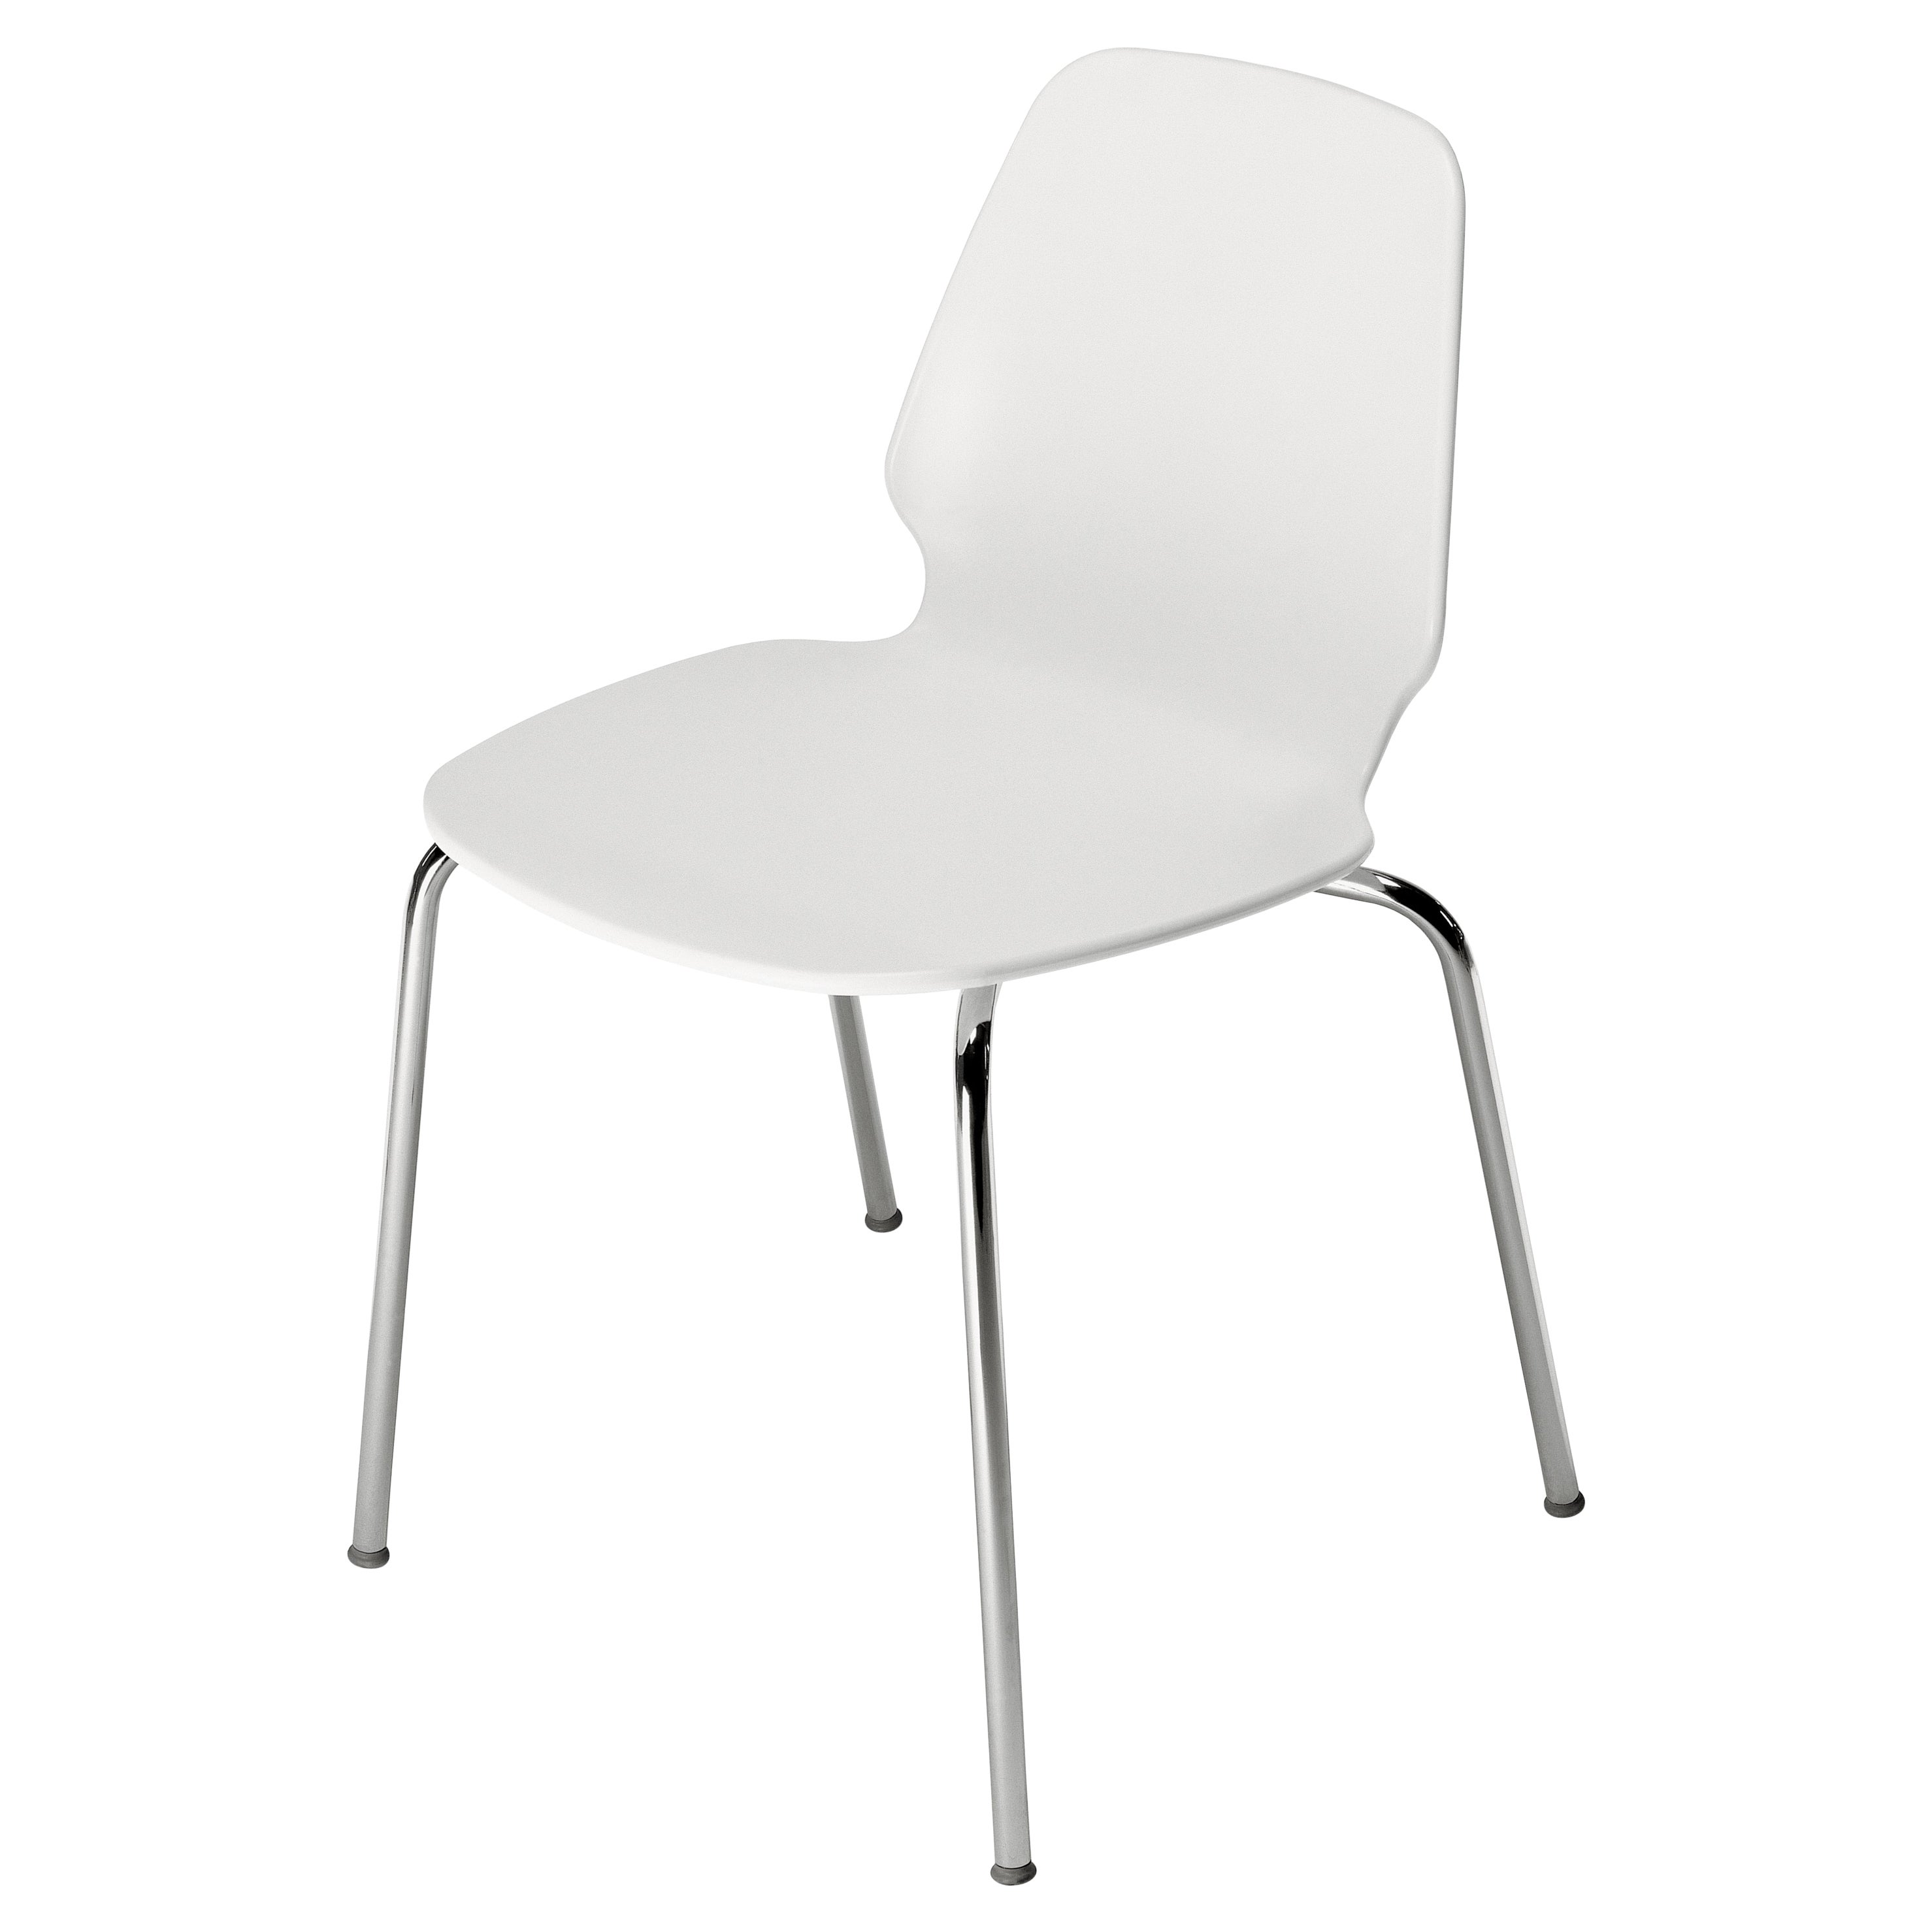 Alias 530 Selinunte Chair in White and Chromed Steel Frame by Alfredo Häberli For Sale